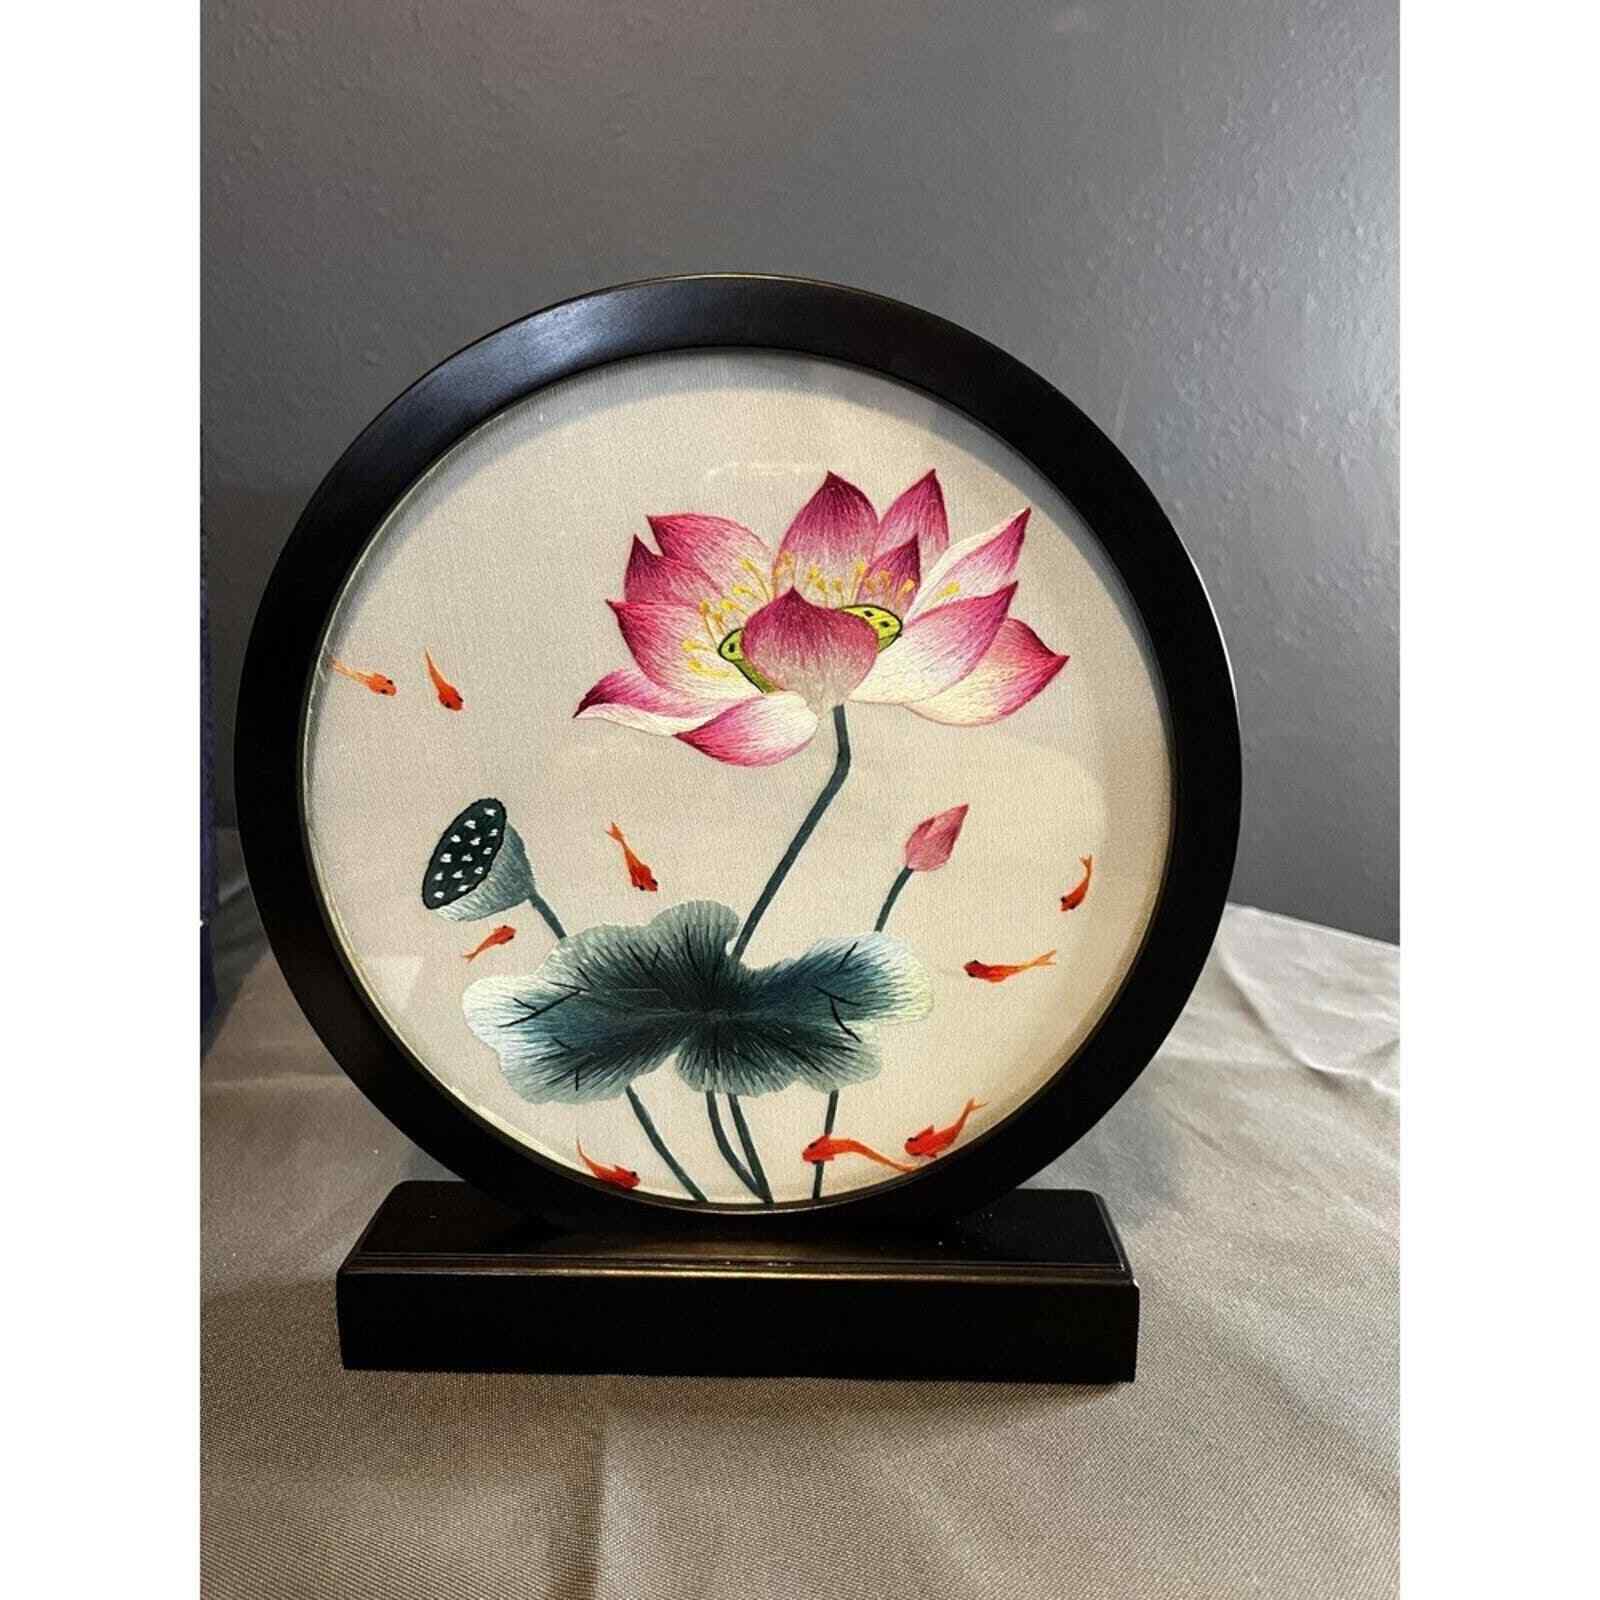 *NIB* PRETTY ASIAN EMBROIDERY IN FRAME WITH STAND - FLORAL WITH FISH